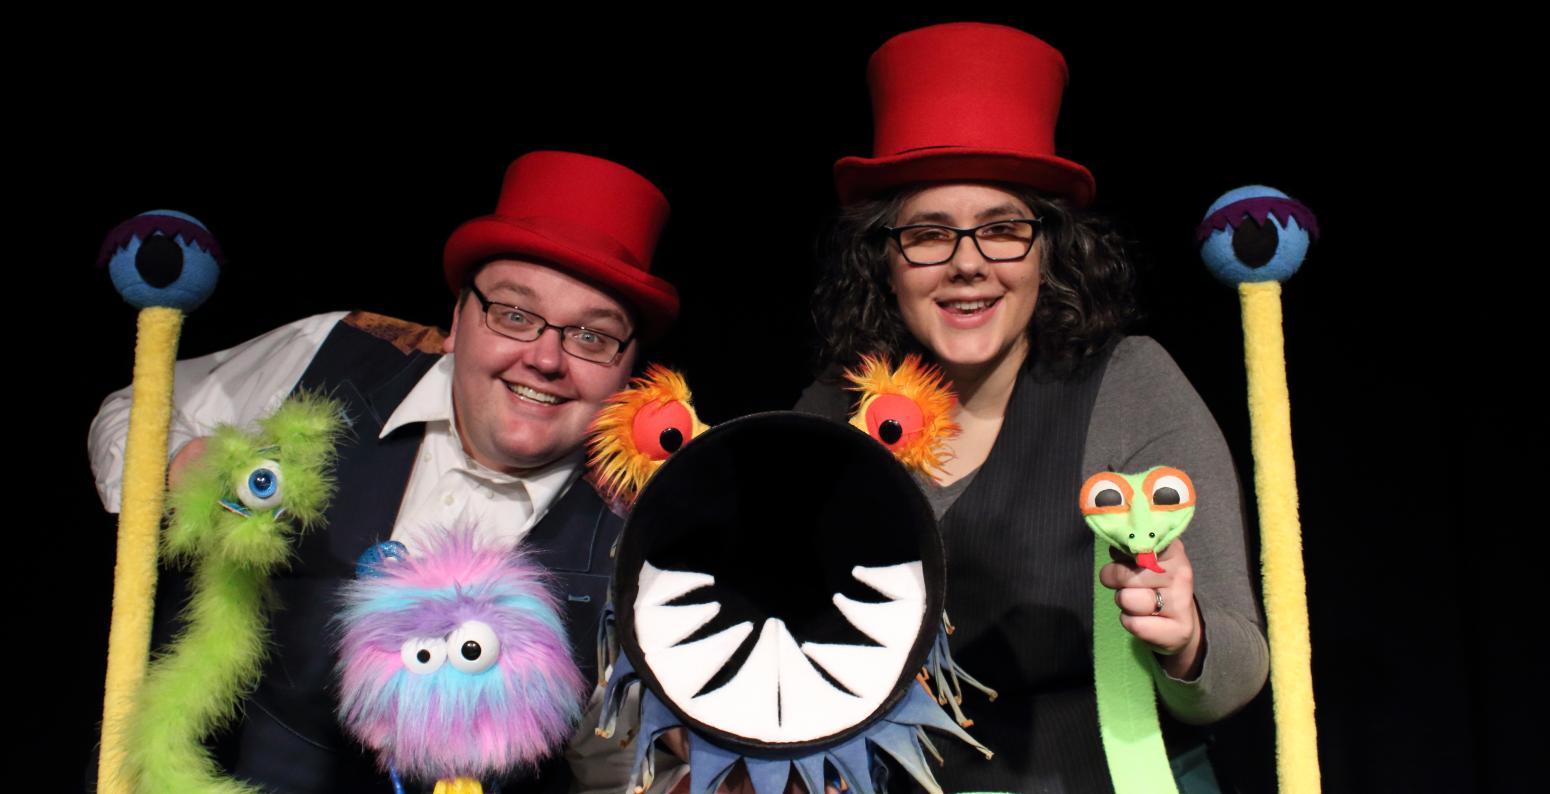 Photo of CactusHead Puppets puppeteers smiling and holding four puppets.